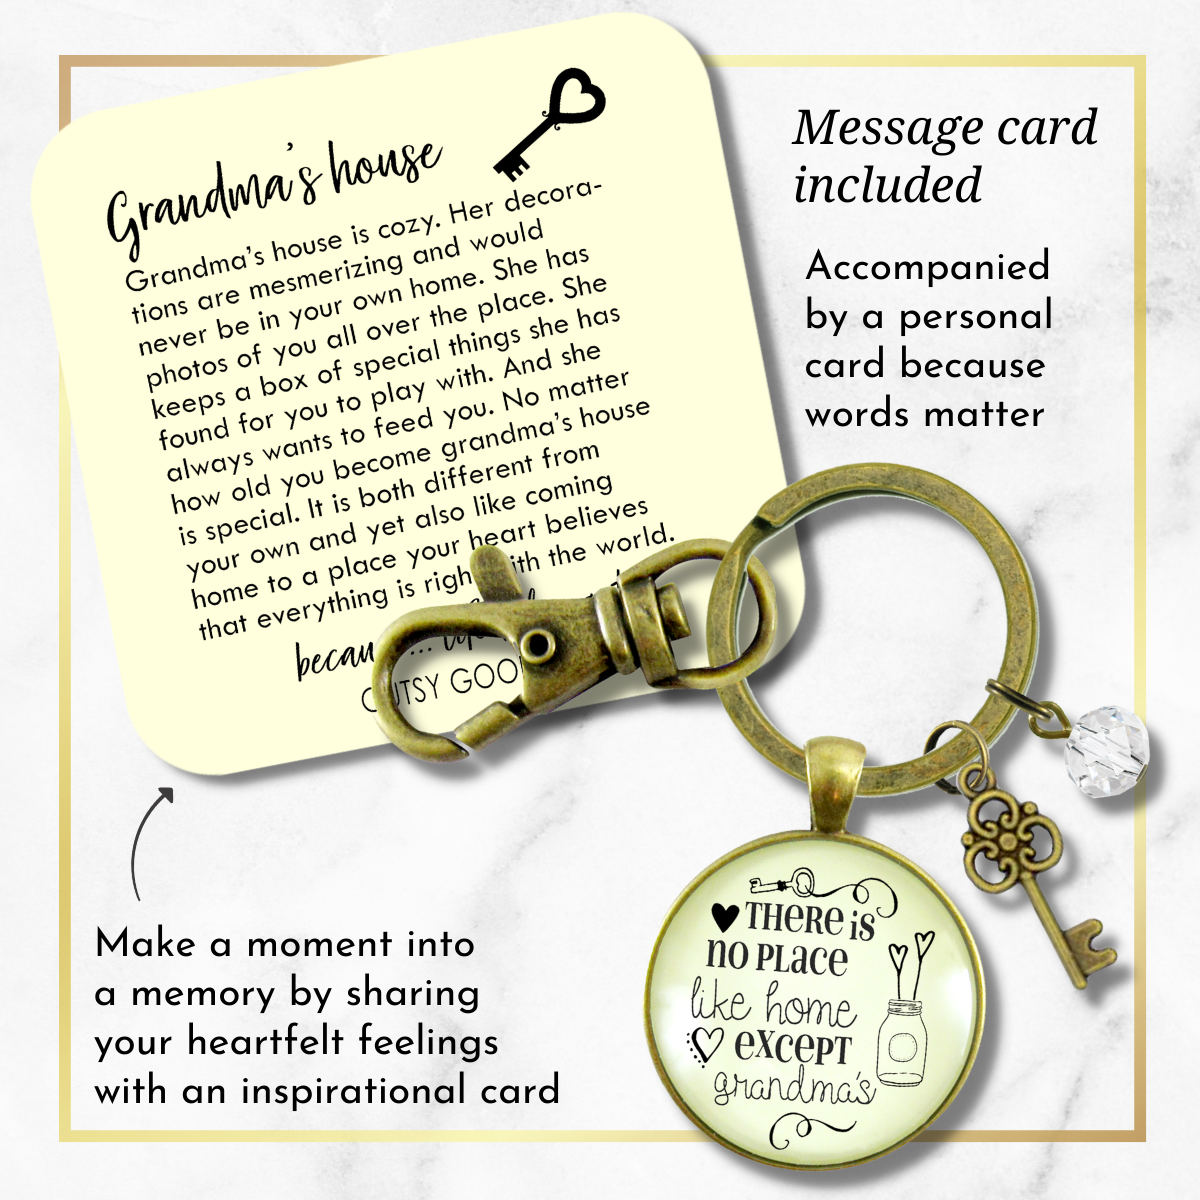 Grandmother Keychain There Is No Place Like Home Except Grandma's House Vintage Gift Charm - Gutsy Goodness Handmade Jewelry;Grandmother Keychain There Is No Place Like Home Except Grandma's House Vintage Gift Charm - Gutsy Goodness Handmade Jewelry Gifts